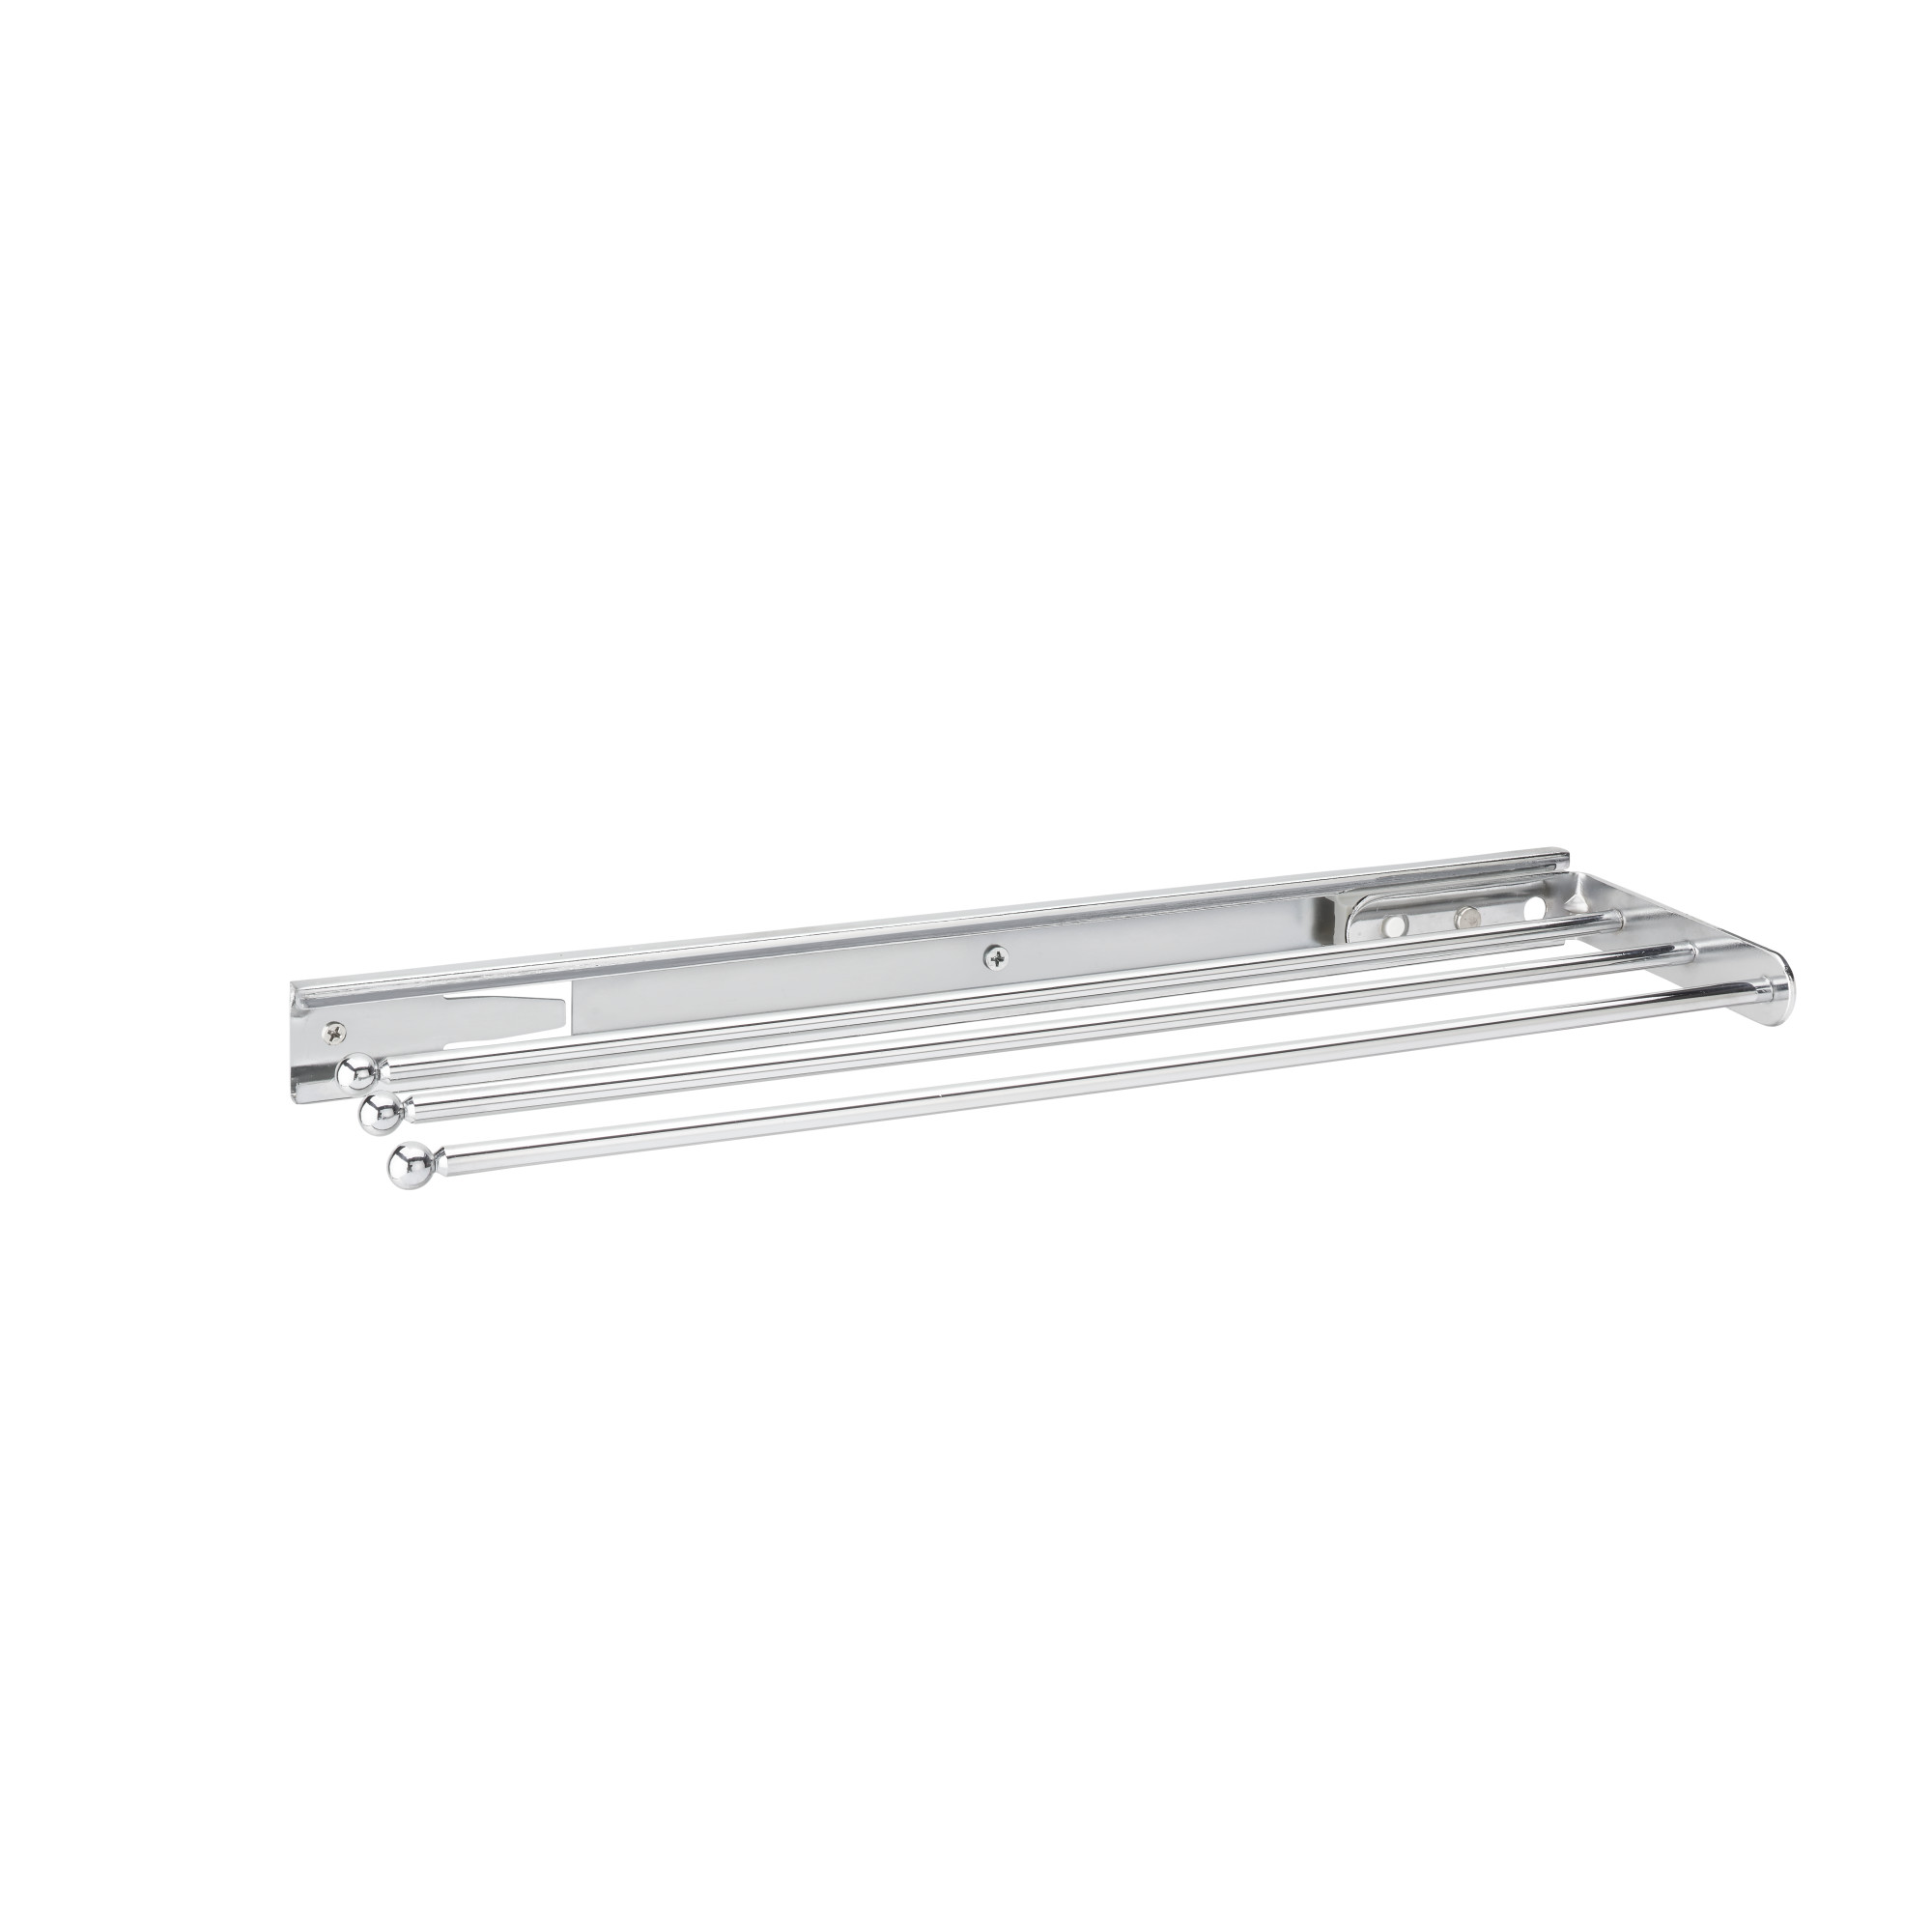 Rev-A-Shelf 563-47 C Under Cabinet Kitchen Prong Pull-Out Towel Bar 